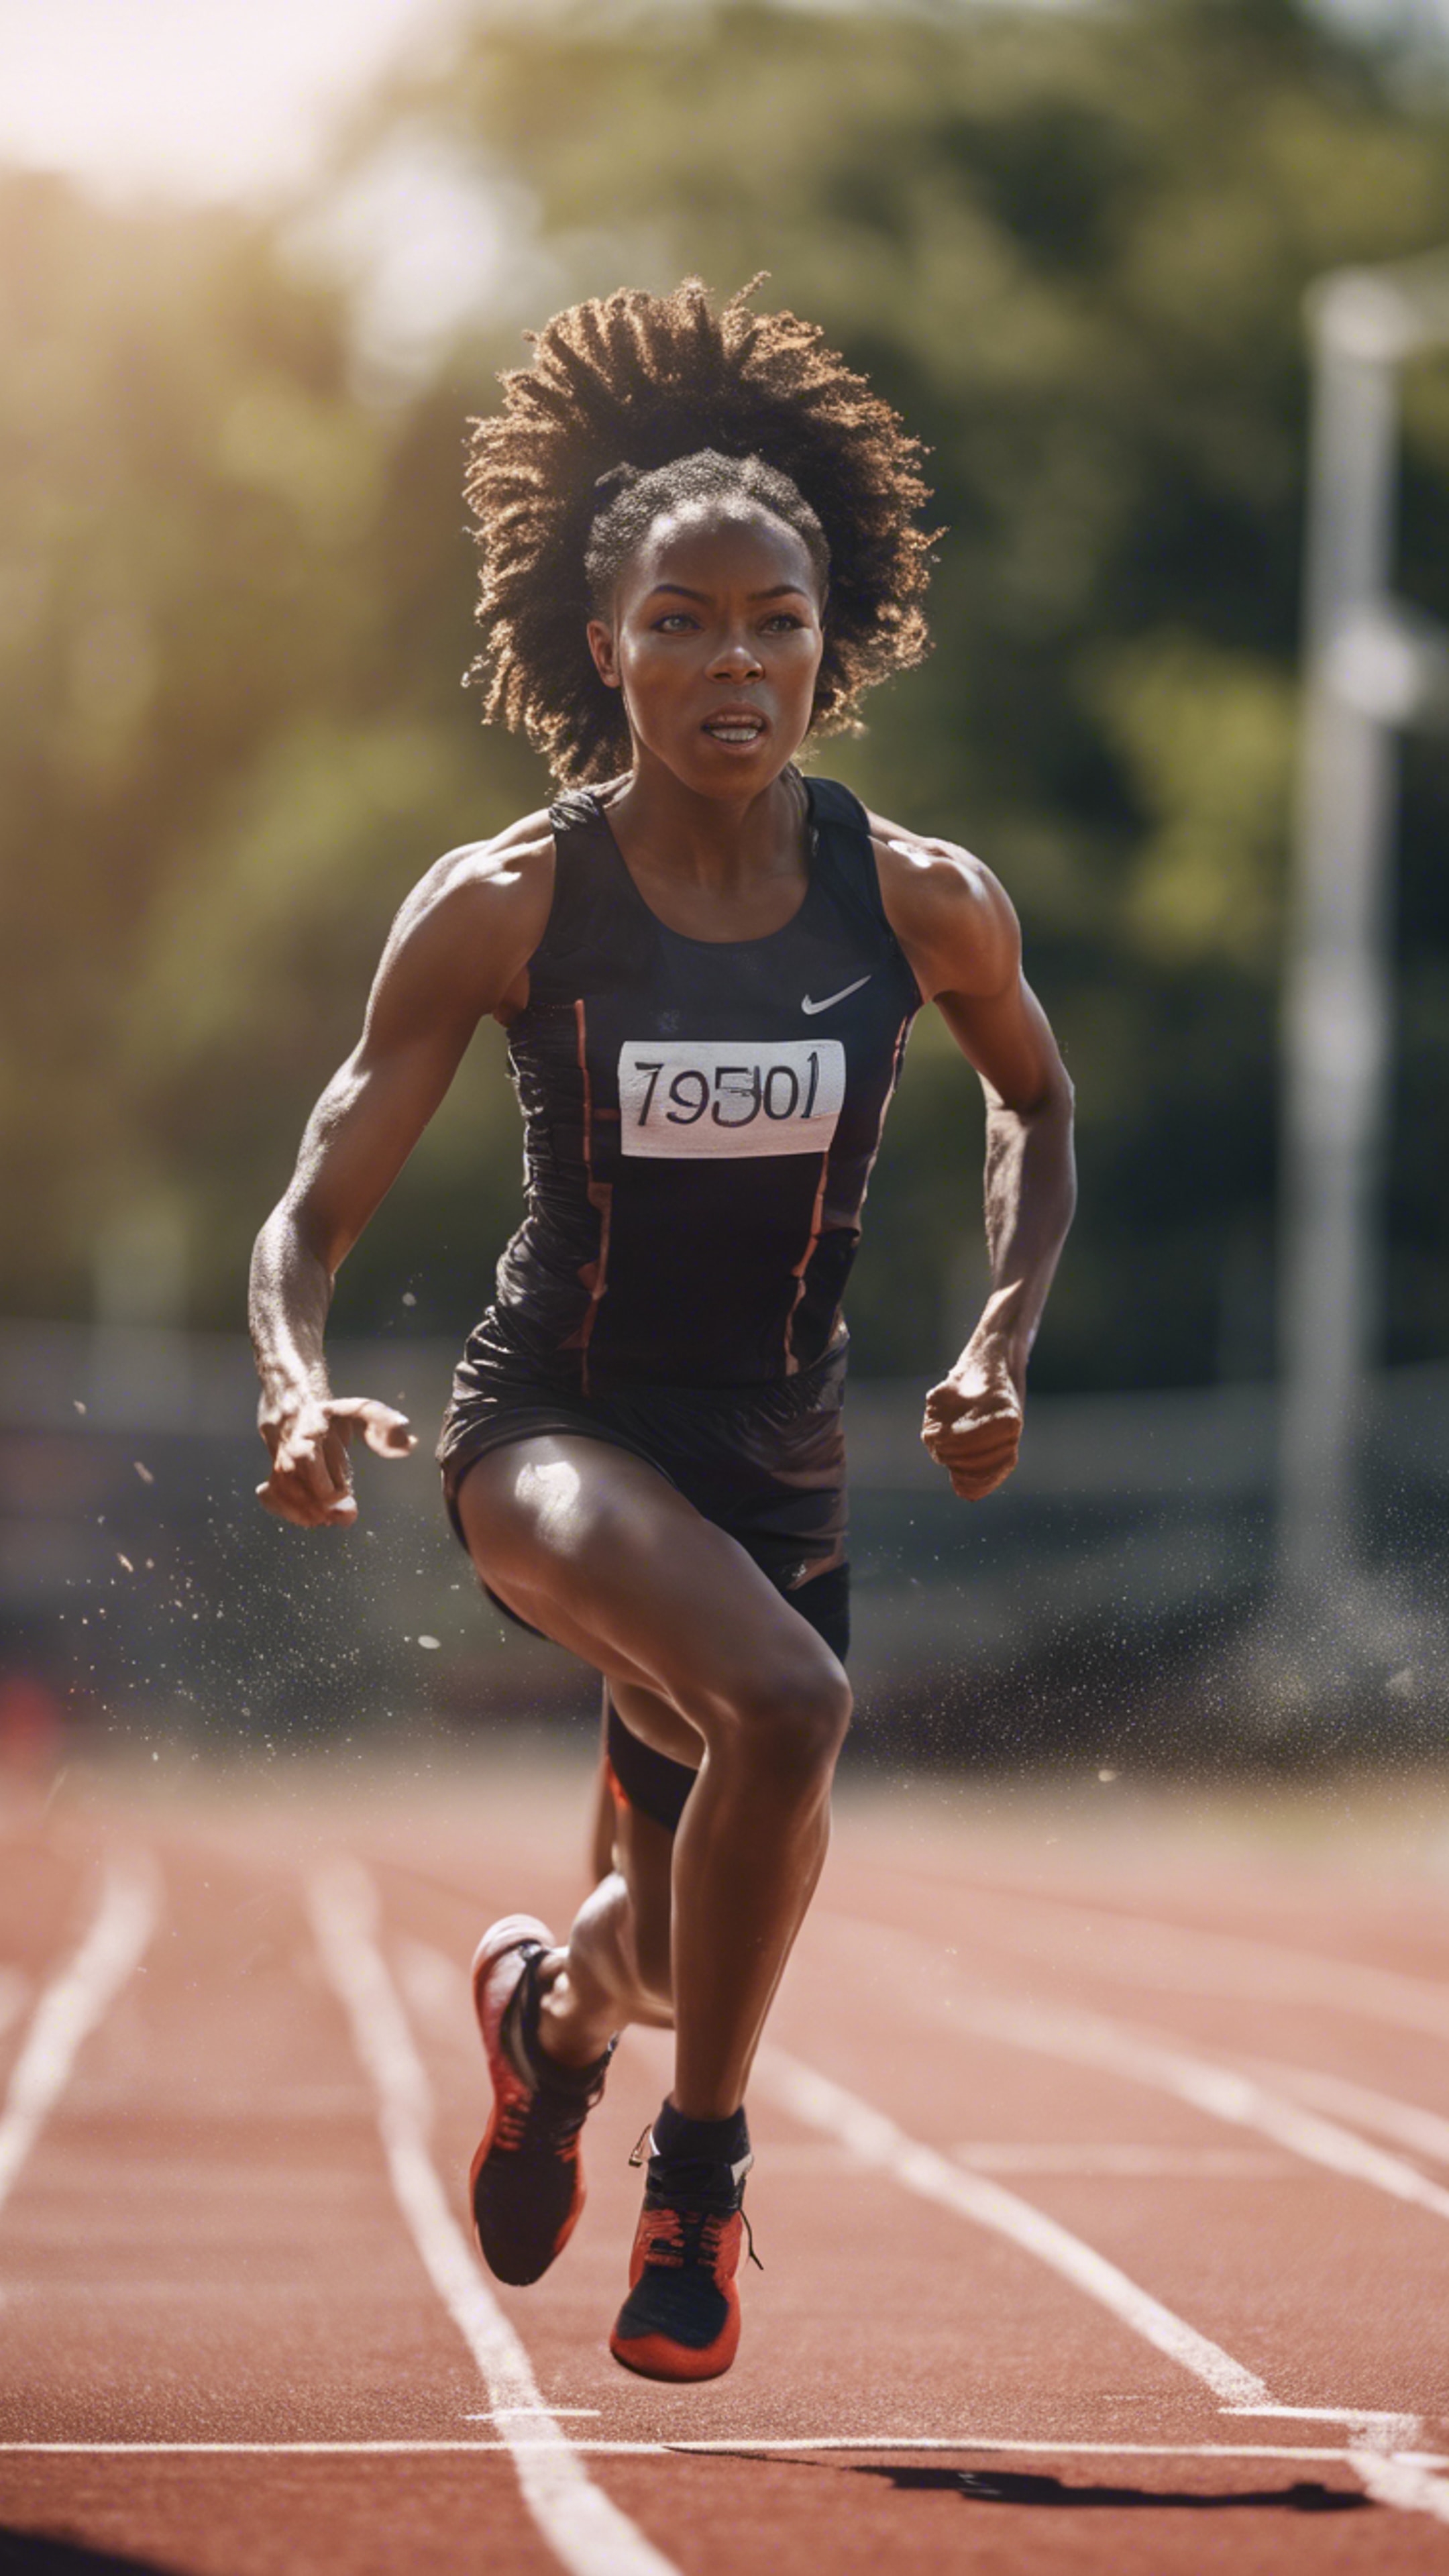 A dynamic image of a black girl engaging in competitive sprint, showing her vital energy. Papel de parede[76eb5b44f4a84b498fc2]